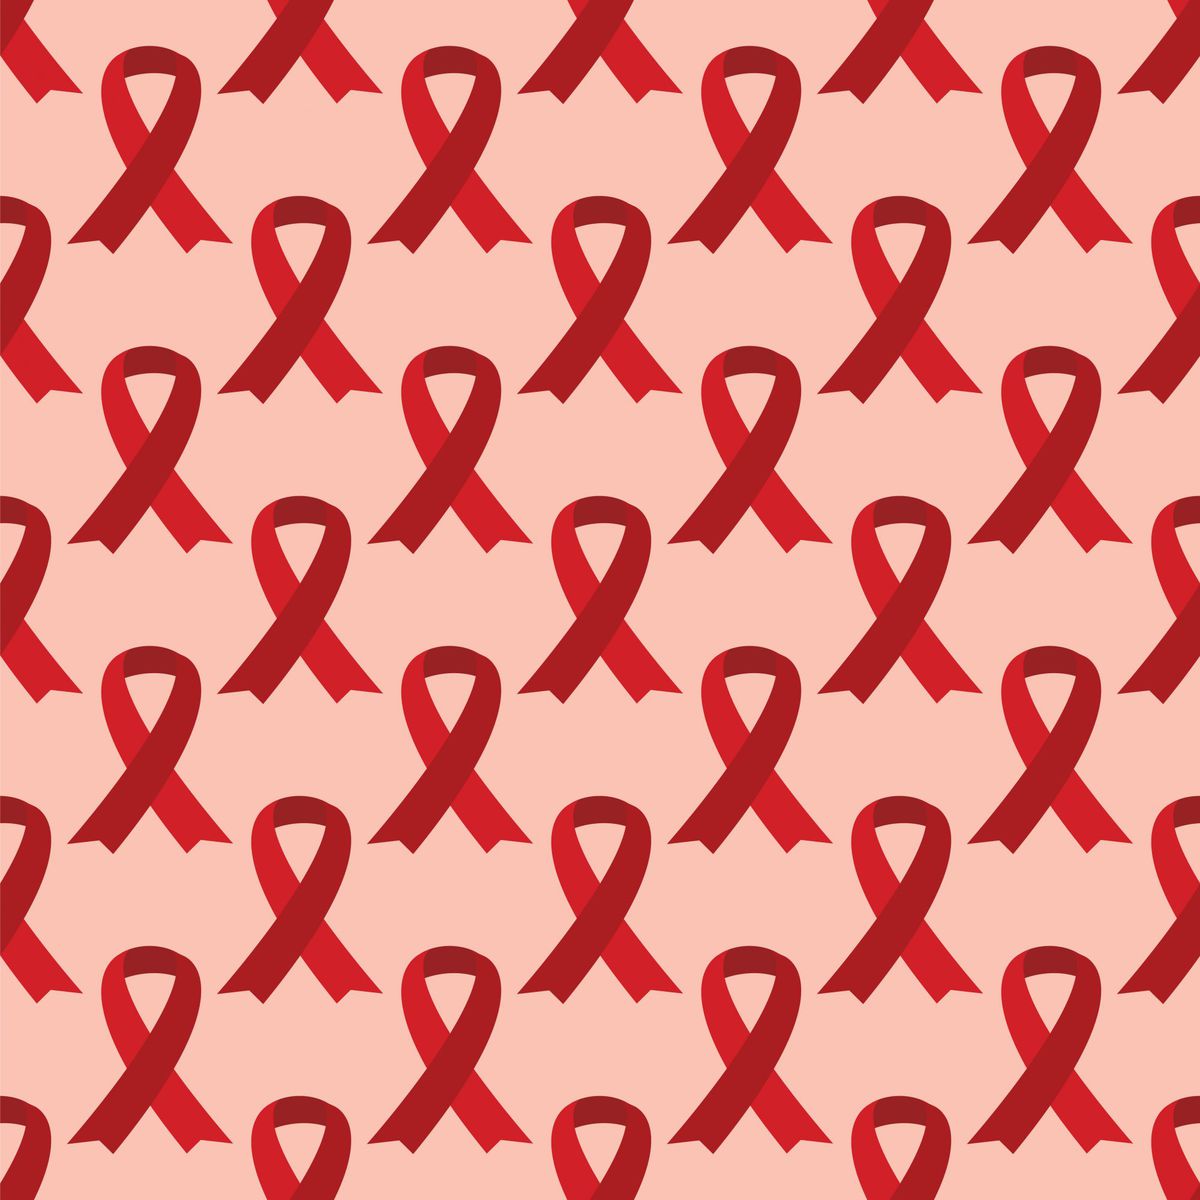 10 Things You Never Knew About HIV and AIDS